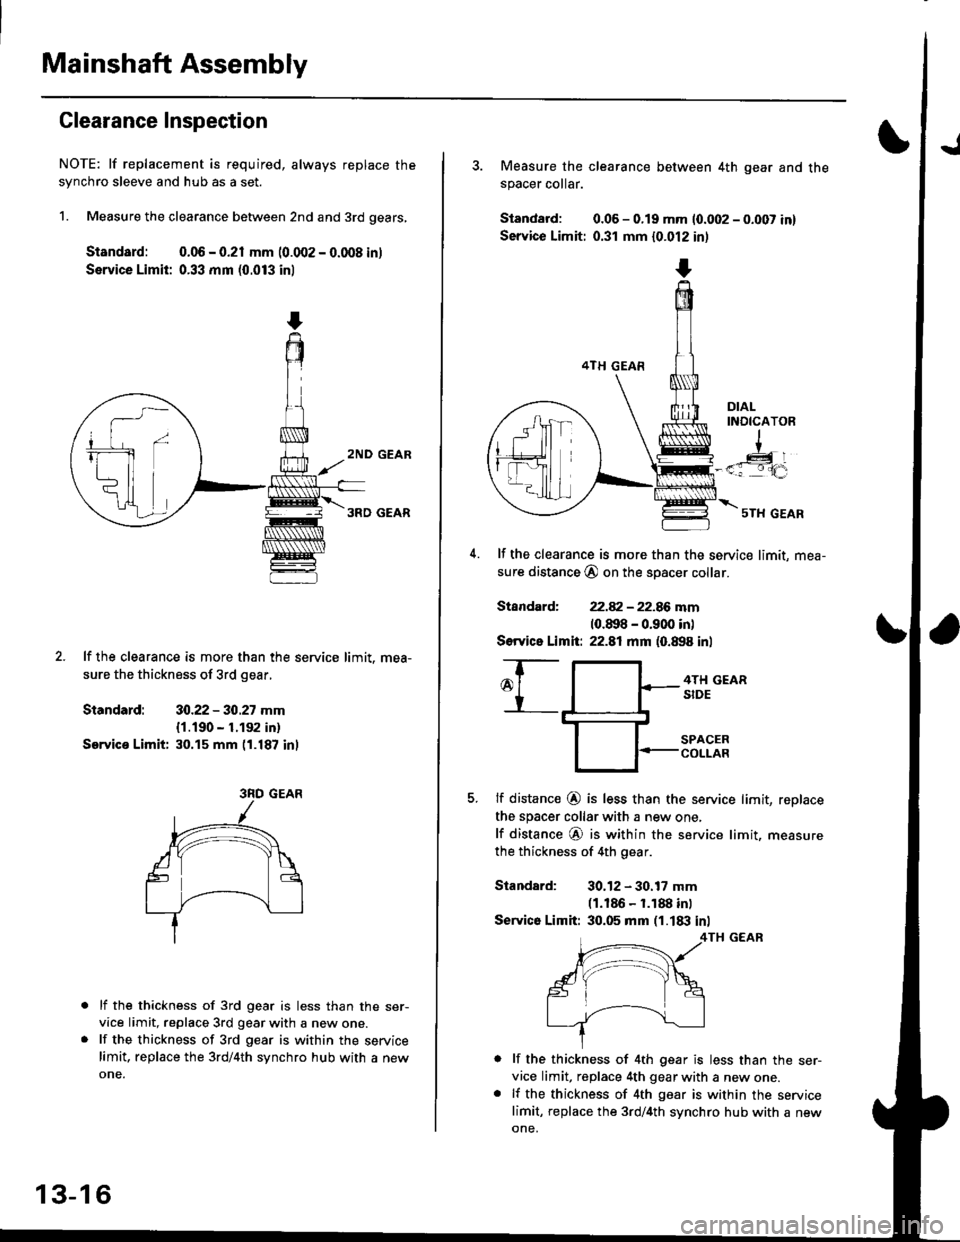 HONDA CIVIC 1996 6.G Workshop Manual Mainshaft Assembly
Clearance Inspection
NOTE: lf replacement is required, always replace the
synchro sleeve and hub as a set.
1. Measure the clearance between 2nd and 3rd gears,
Standard: 0.06 - 0.21 